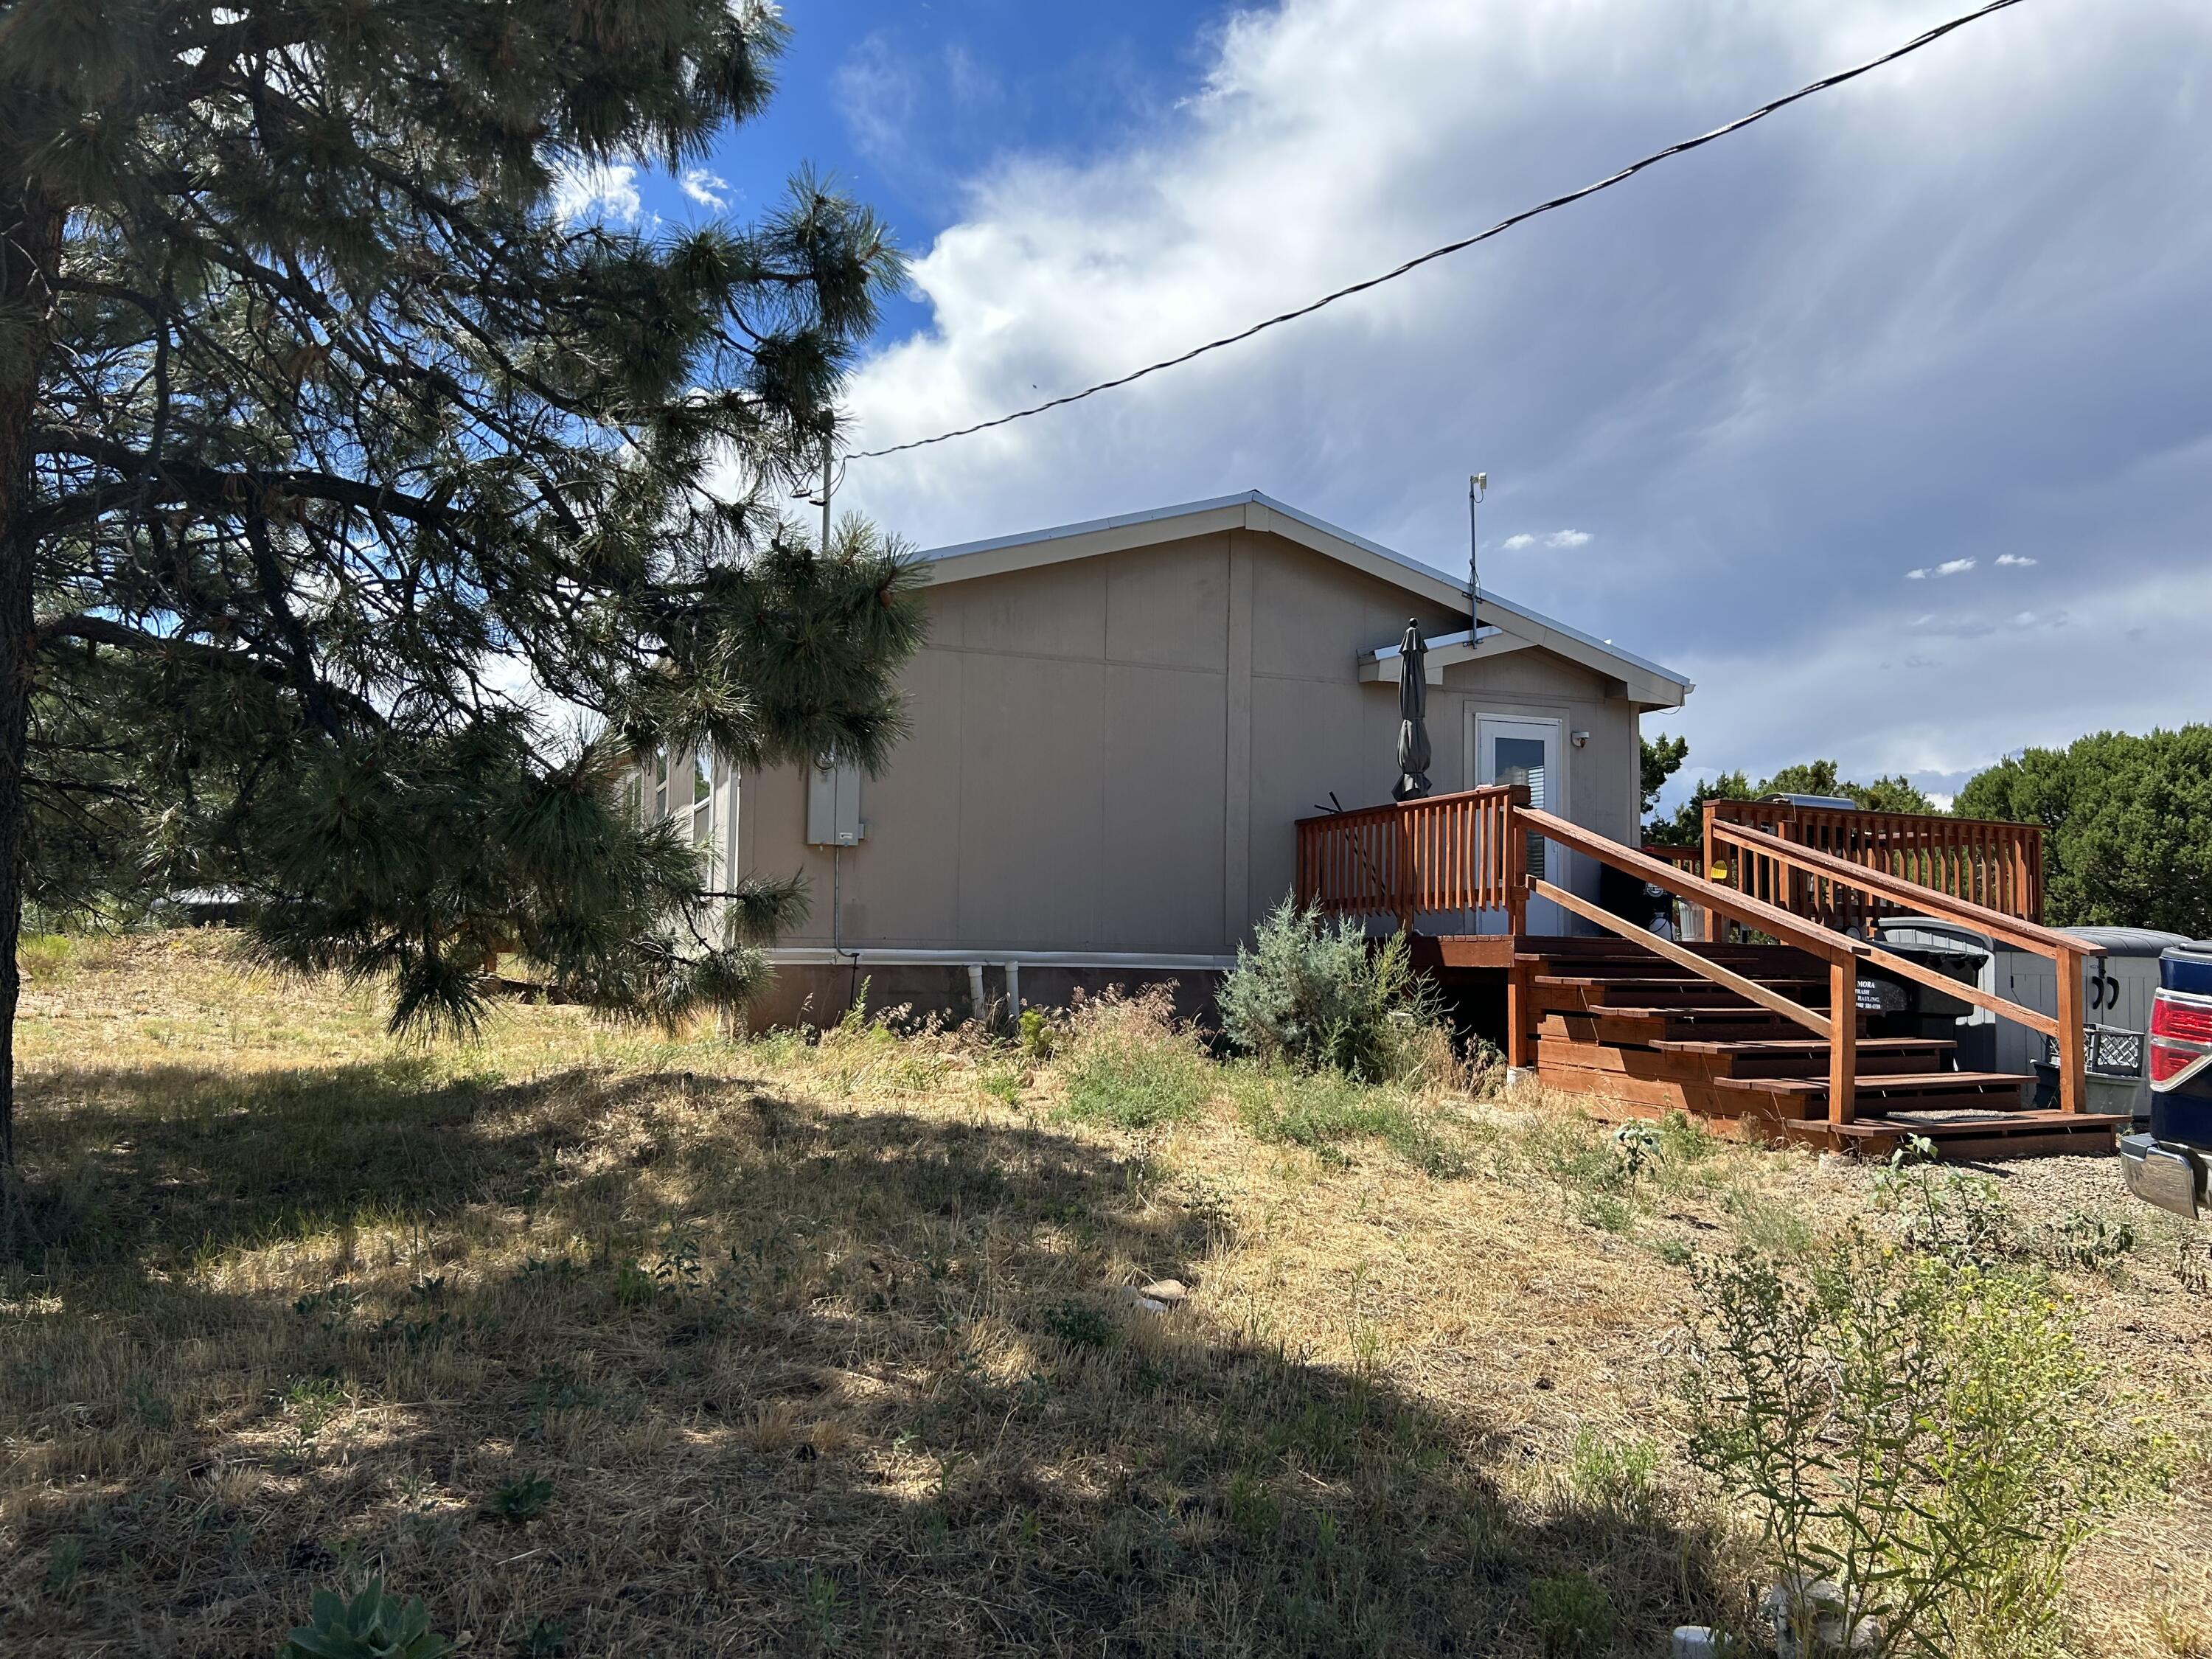 Welcome to the East Mountains.  This home is a short 35 minute commute Albuquerque.  2 bedroom 1-1/2 bathroom on 2.69 wooded acres.  Open floor plan with large kitchen... Metal roof and custom decks .  This is a must see.   This home is on a water haul with two tank and system 3600 gallons.